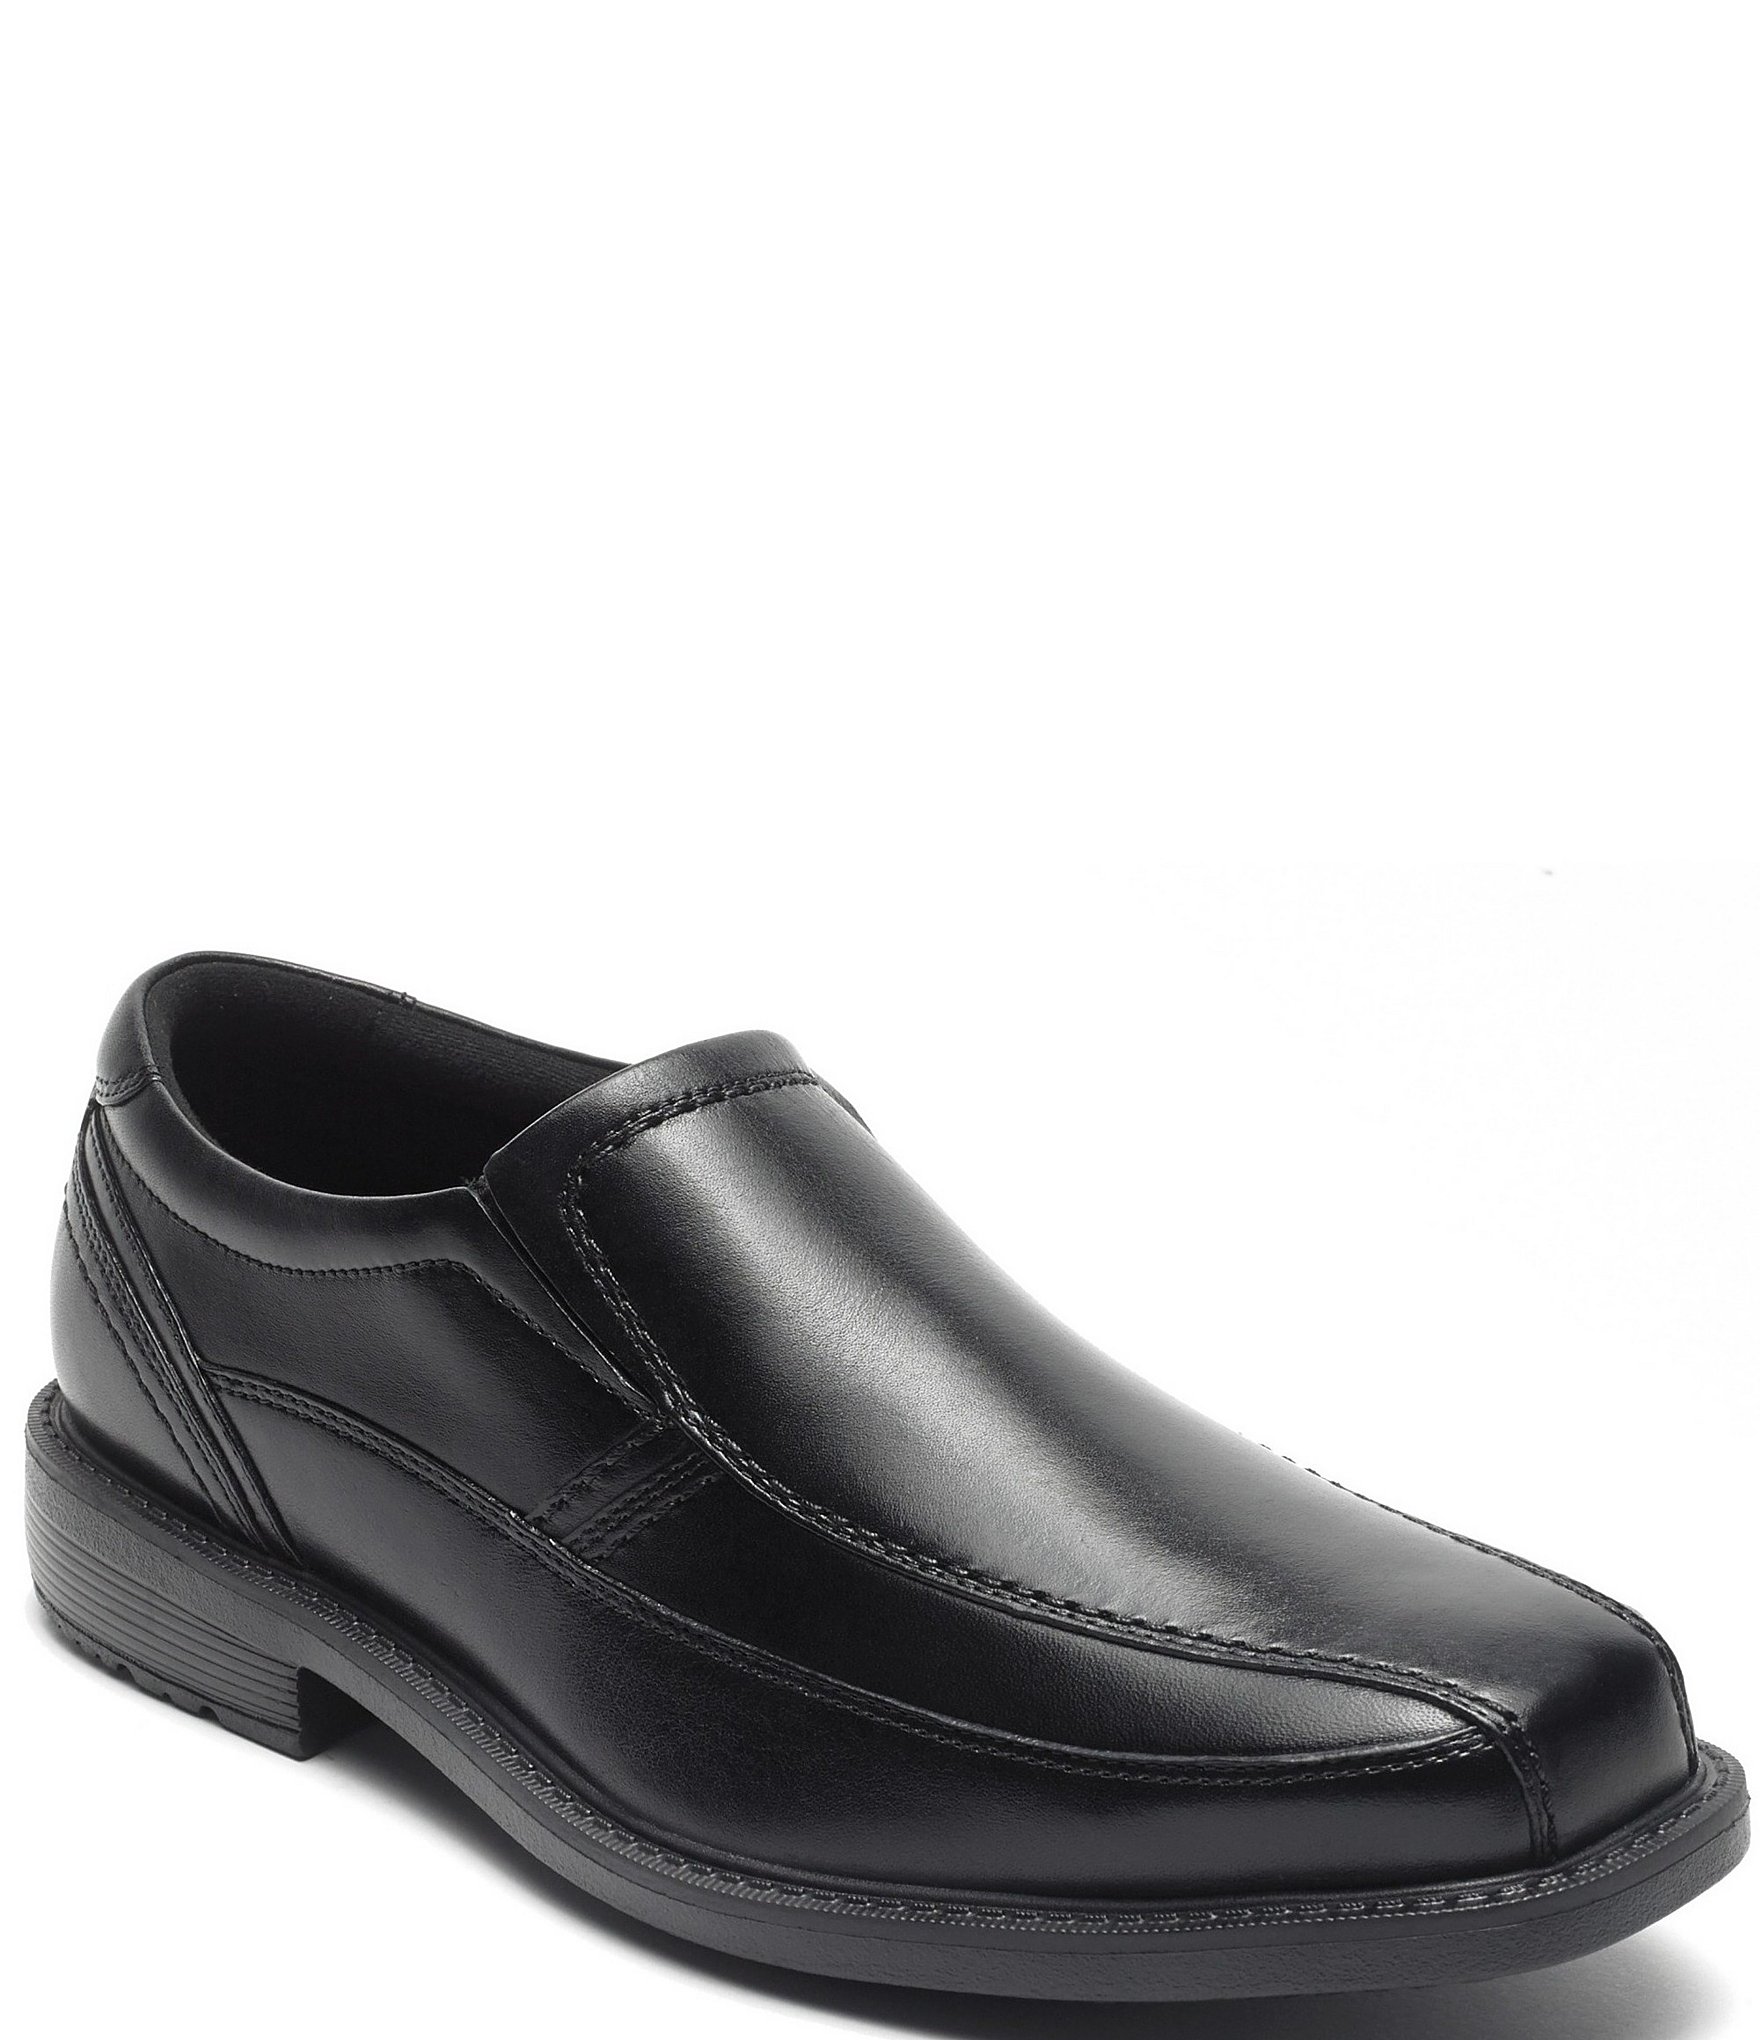 mens extra wide slip on dress shoes